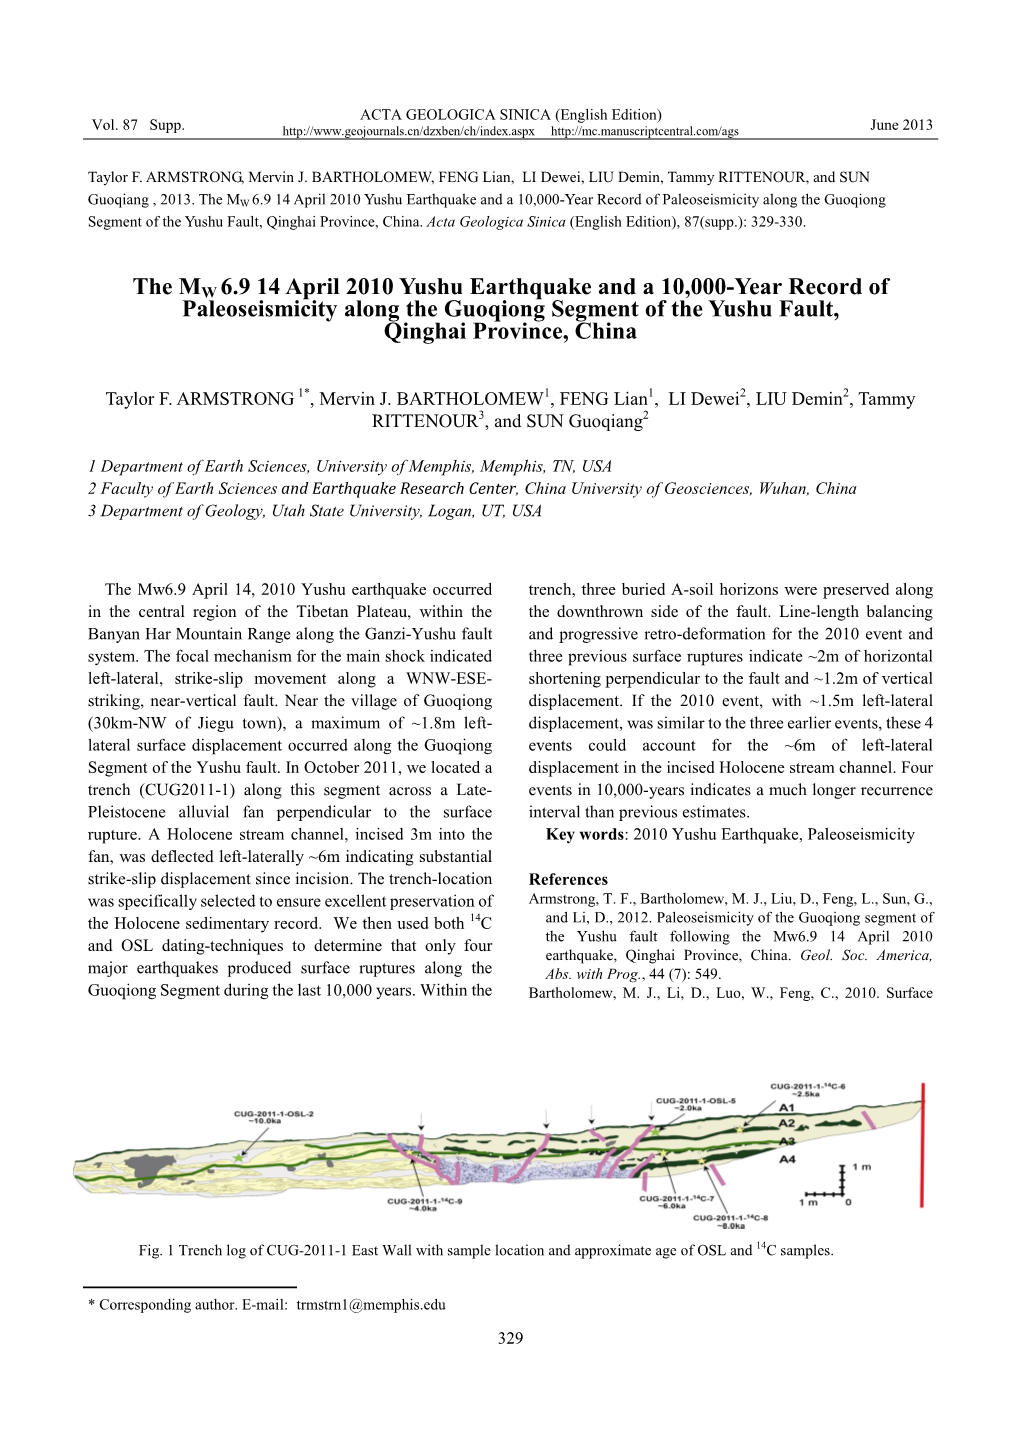 The MW 6.9 14 April 2010 Yushu Earthquake and a 10,000-Year Record of Paleoseismicity Along the Guoqiong Segment of the Yushu Fault, Qinghai Province, China